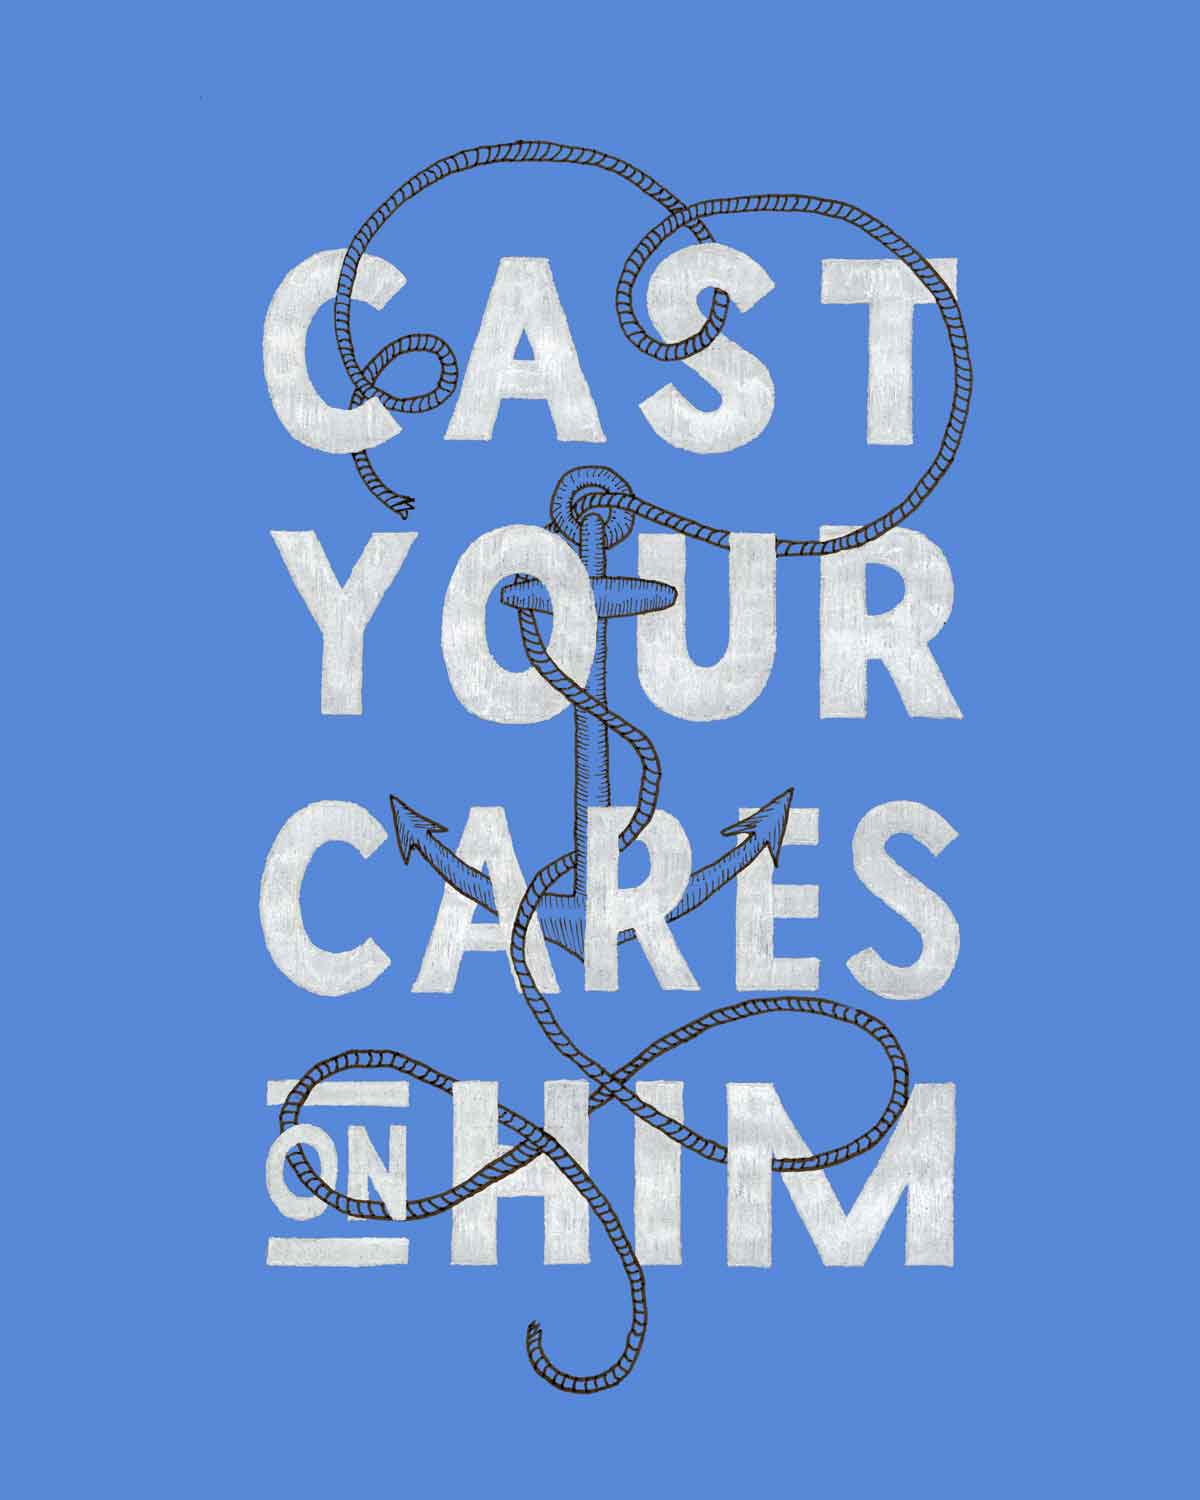 Psalm 55 hand lettering that reads: Cast your cares on him